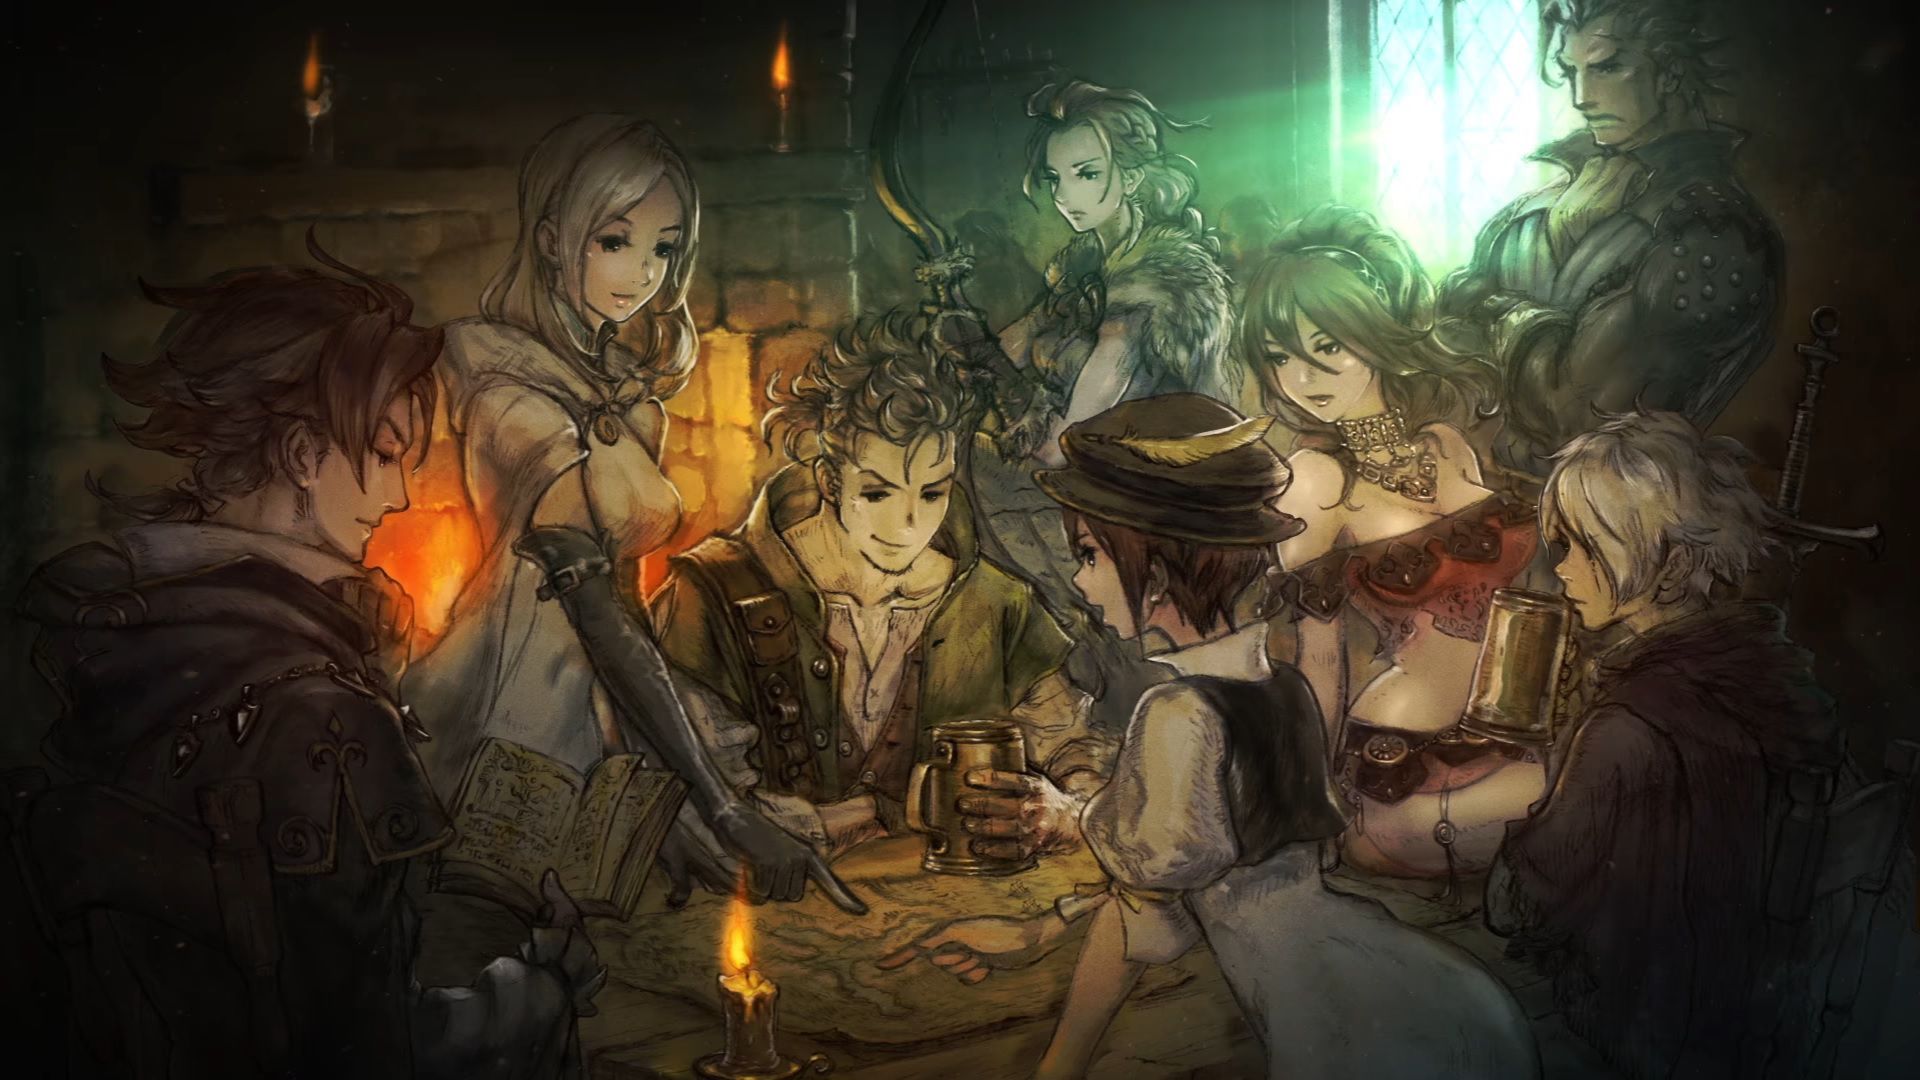 ‘Octopath Traveler II’ Launches February 23rd – COMICON